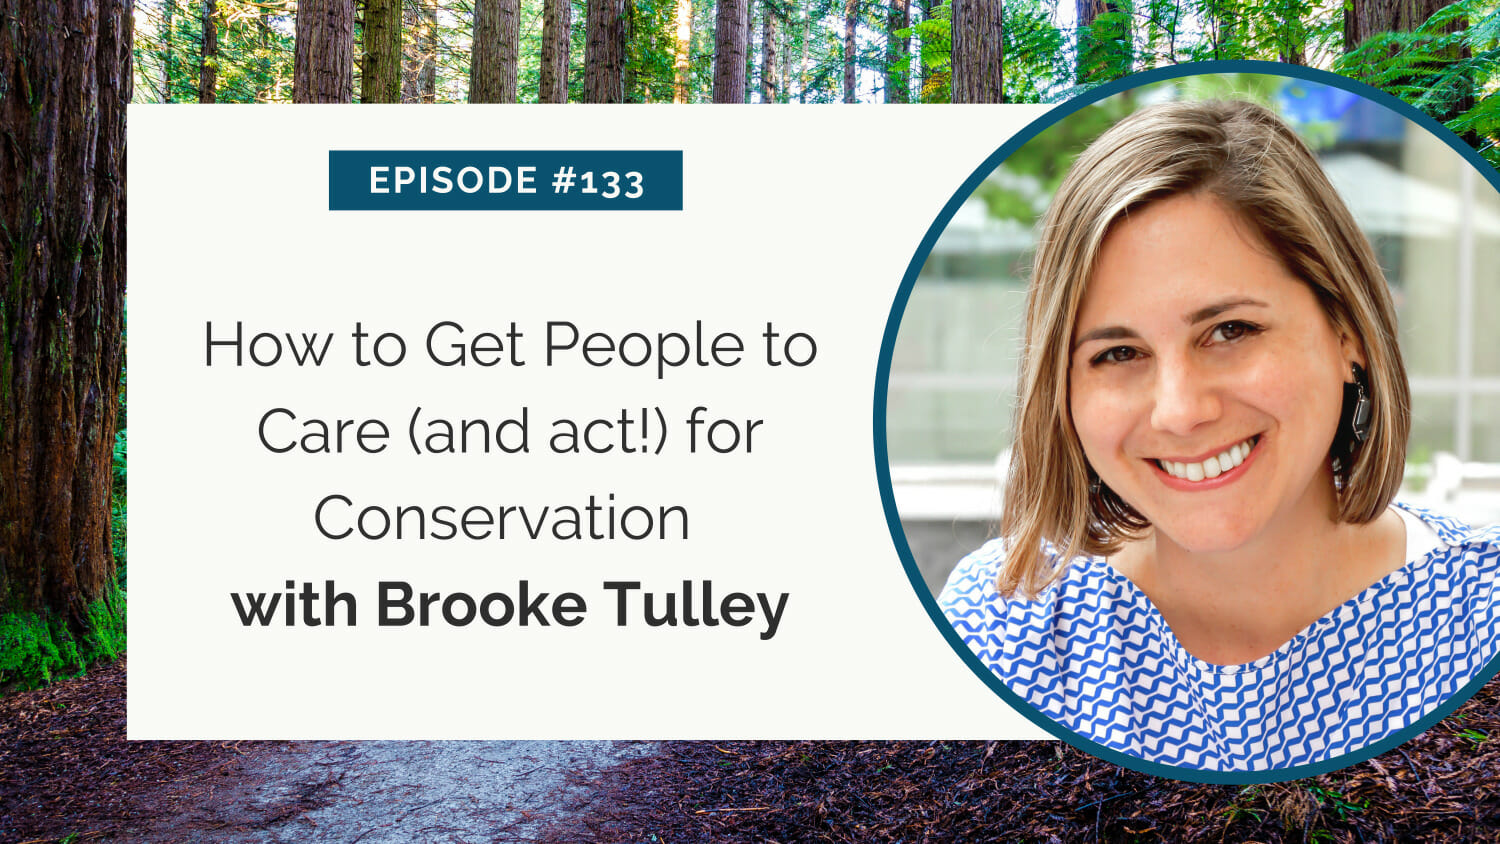 Podcast episode #133: "how to get people to care (and act!) for conservation with brooke tulley" against a backdrop of trees.